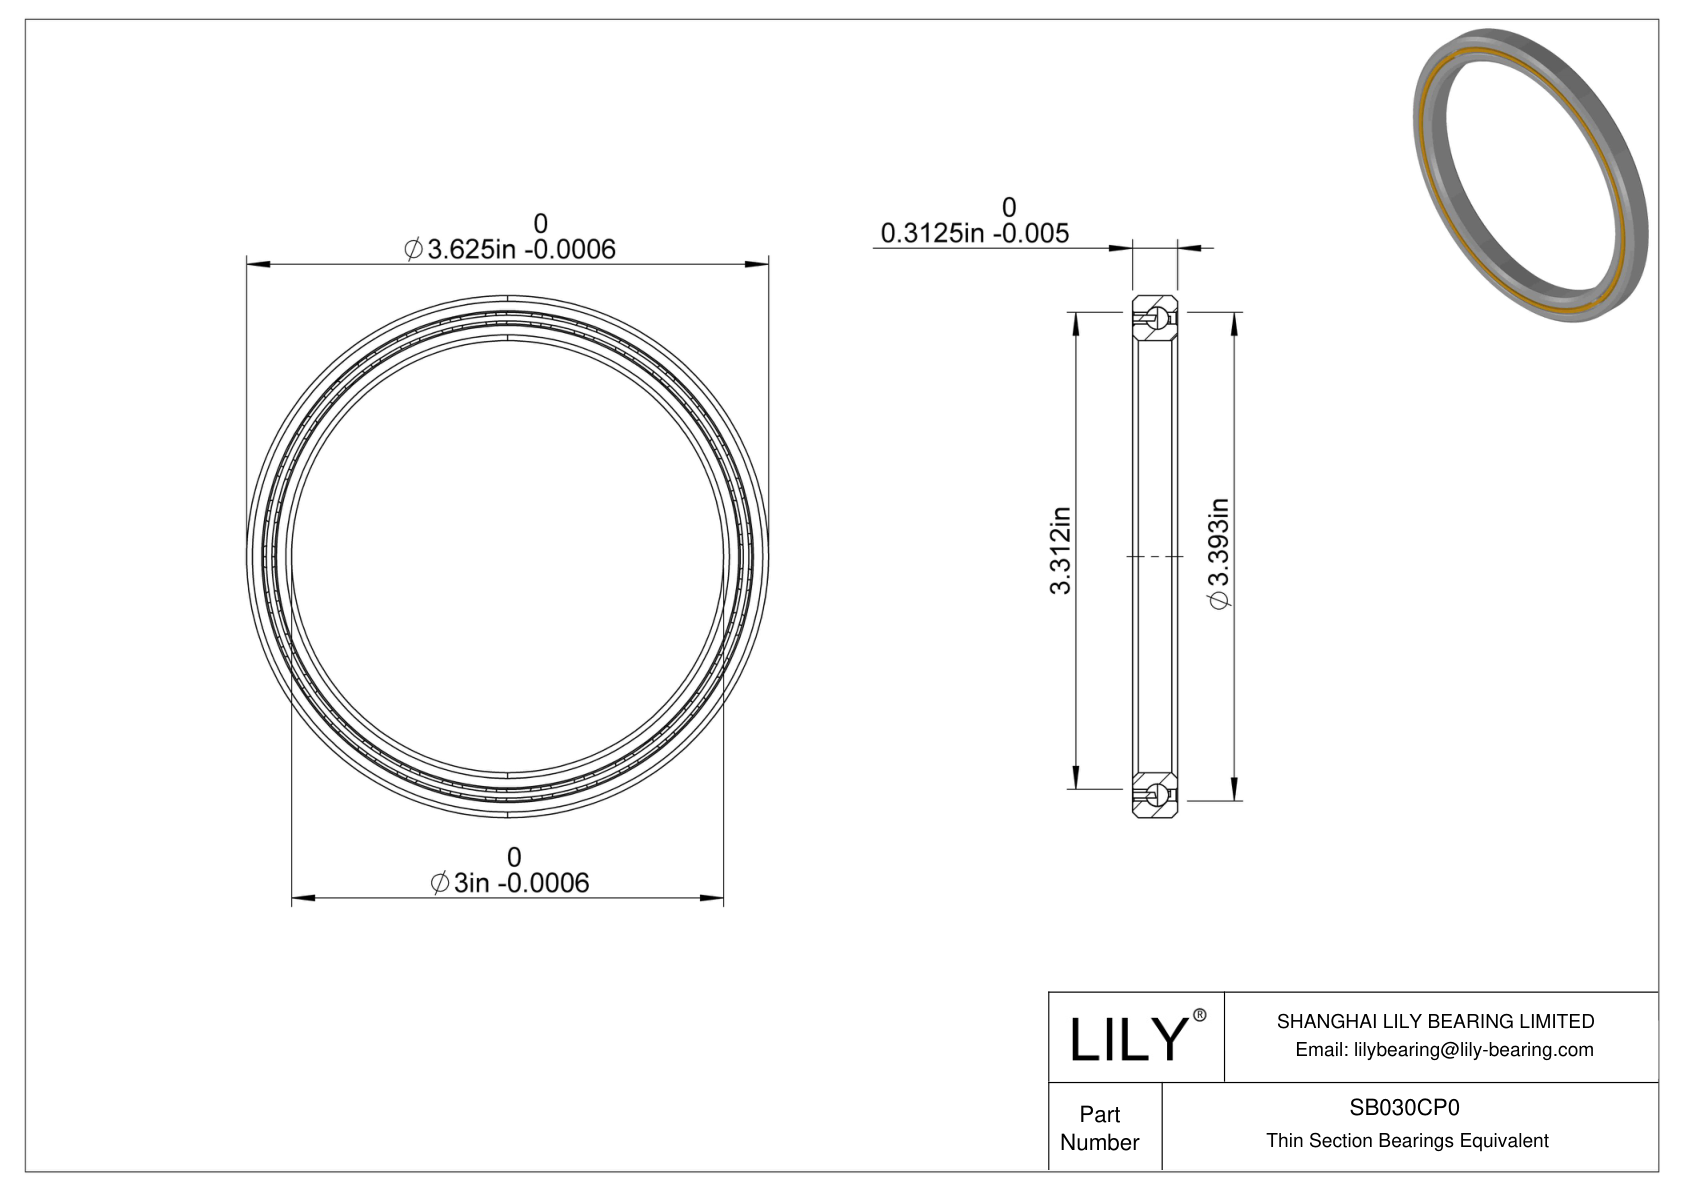 SB030CP0 Constant Section (CS) Bearings cad drawing